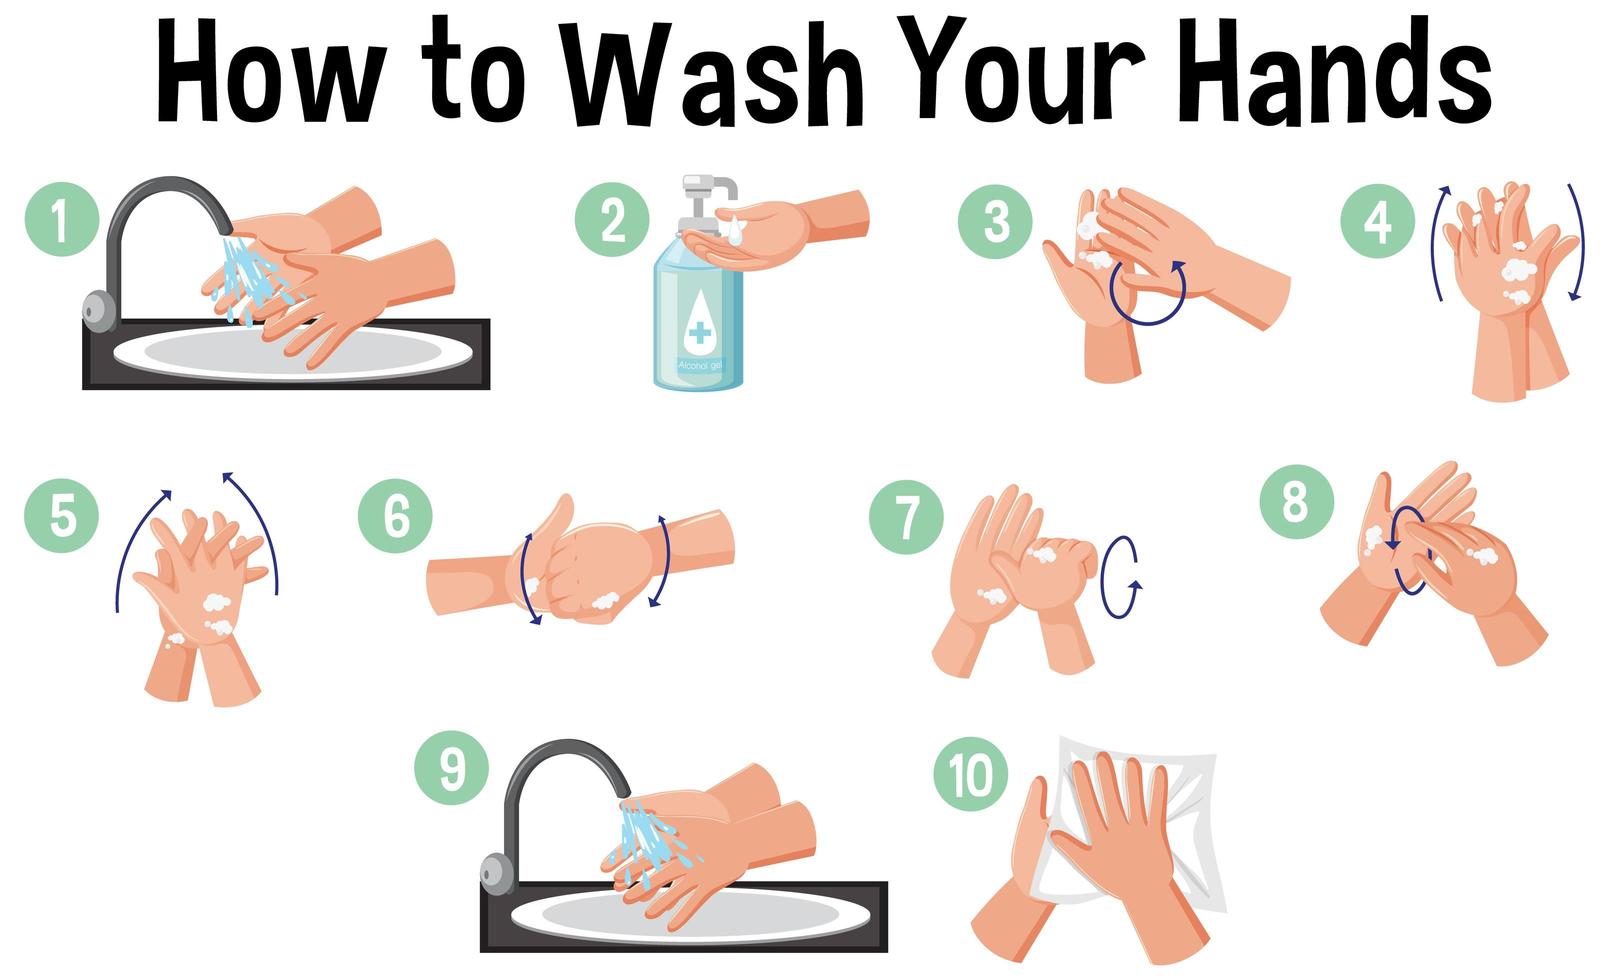 How to wash hands infographic vector